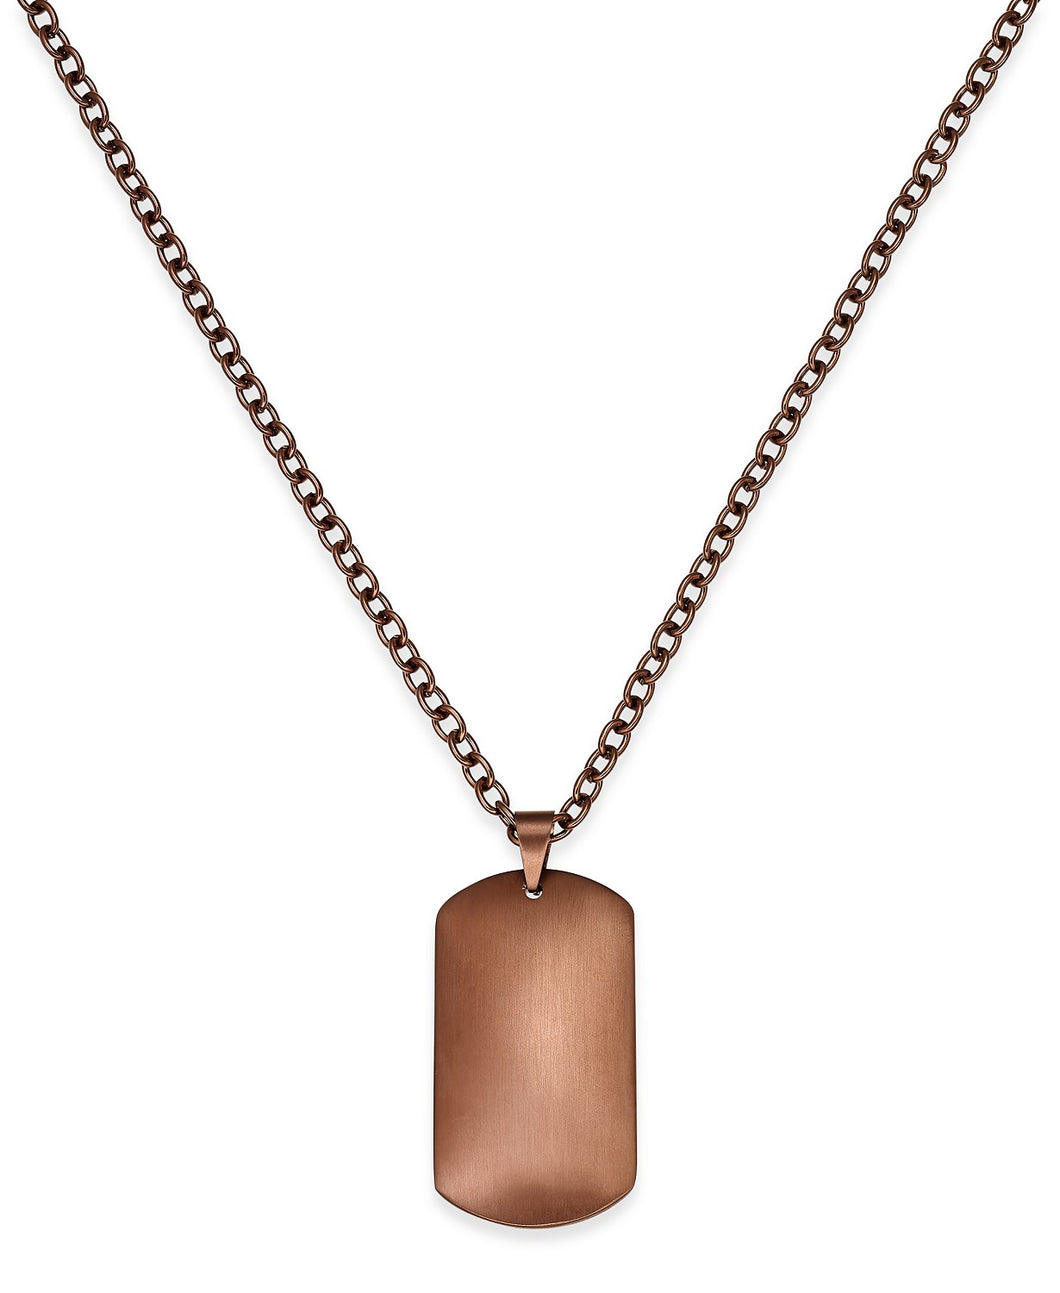 Men's Copper-Tone Stainless Steel Dog Tag Pendant Necklace